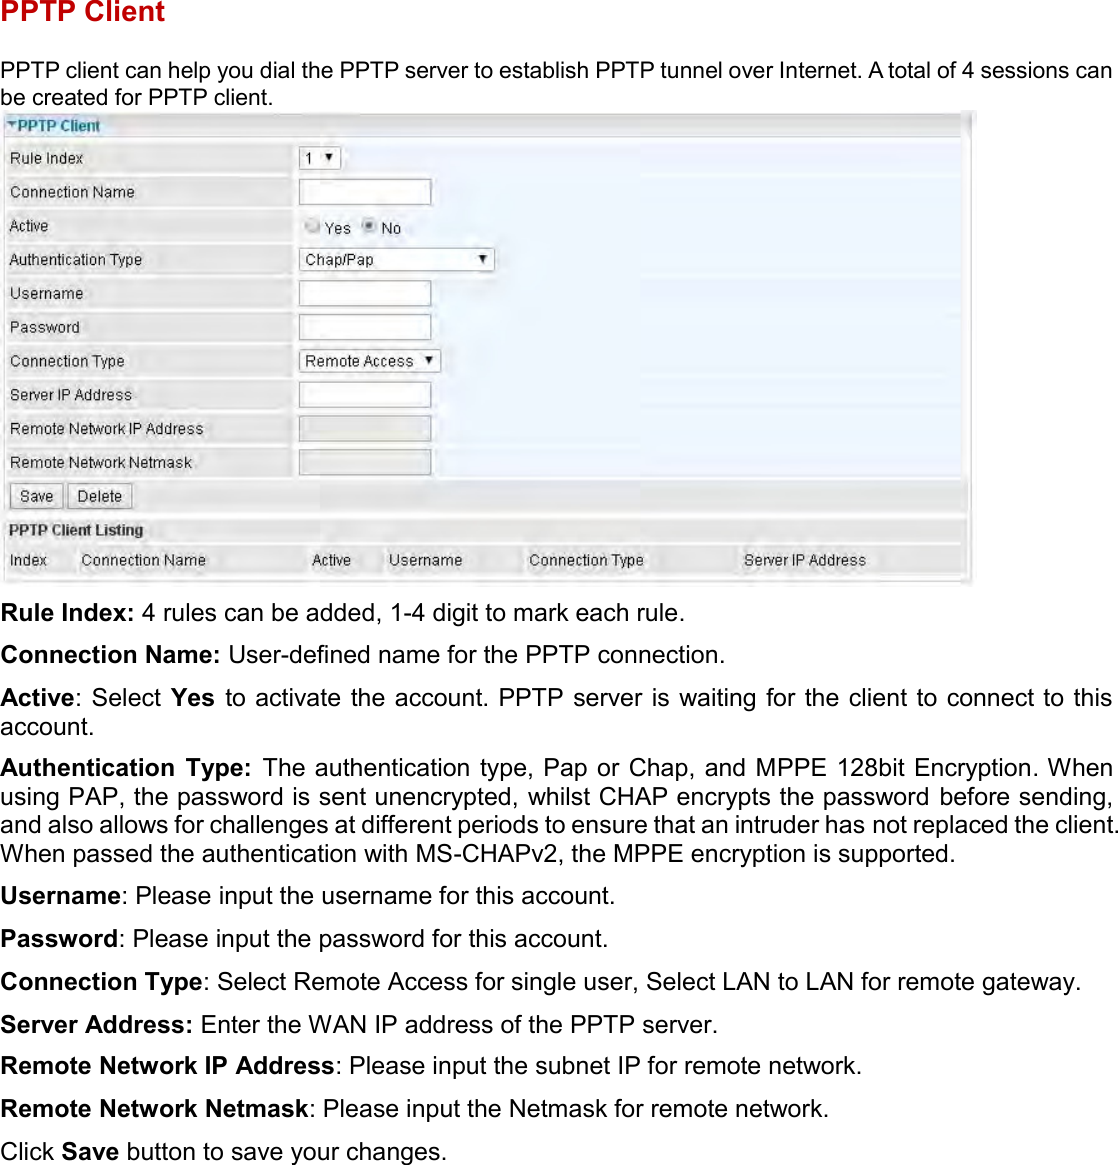    PPTP Client PPTP client can help you dial the PPTP server to establish PPTP tunnel over Internet. A total of 4 sessions can be created for PPTP client.  Rule Index: 4 rules can be added, 1-4 digit to mark each rule. Connection Name: User-defined name for the PPTP connection. Active: Select  Yes  to activate the account. PPTP server is waiting for the client to connect to this account. Authentication  Type:  The authentication type, Pap or Chap, and MPPE 128bit Encryption. When using PAP, the password is sent unencrypted, whilst CHAP encrypts the password before sending, and also allows for challenges at different periods to ensure that an intruder has not replaced the client. When passed the authentication with MS-CHAPv2, the MPPE encryption is supported. Username: Please input the username for this account. Password: Please input the password for this account. Connection Type: Select Remote Access for single user, Select LAN to LAN for remote gateway. Server Address: Enter the WAN IP address of the PPTP server. Remote Network IP Address: Please input the subnet IP for remote network. Remote Network Netmask: Please input the Netmask for remote network. Click Save button to save your changes.   